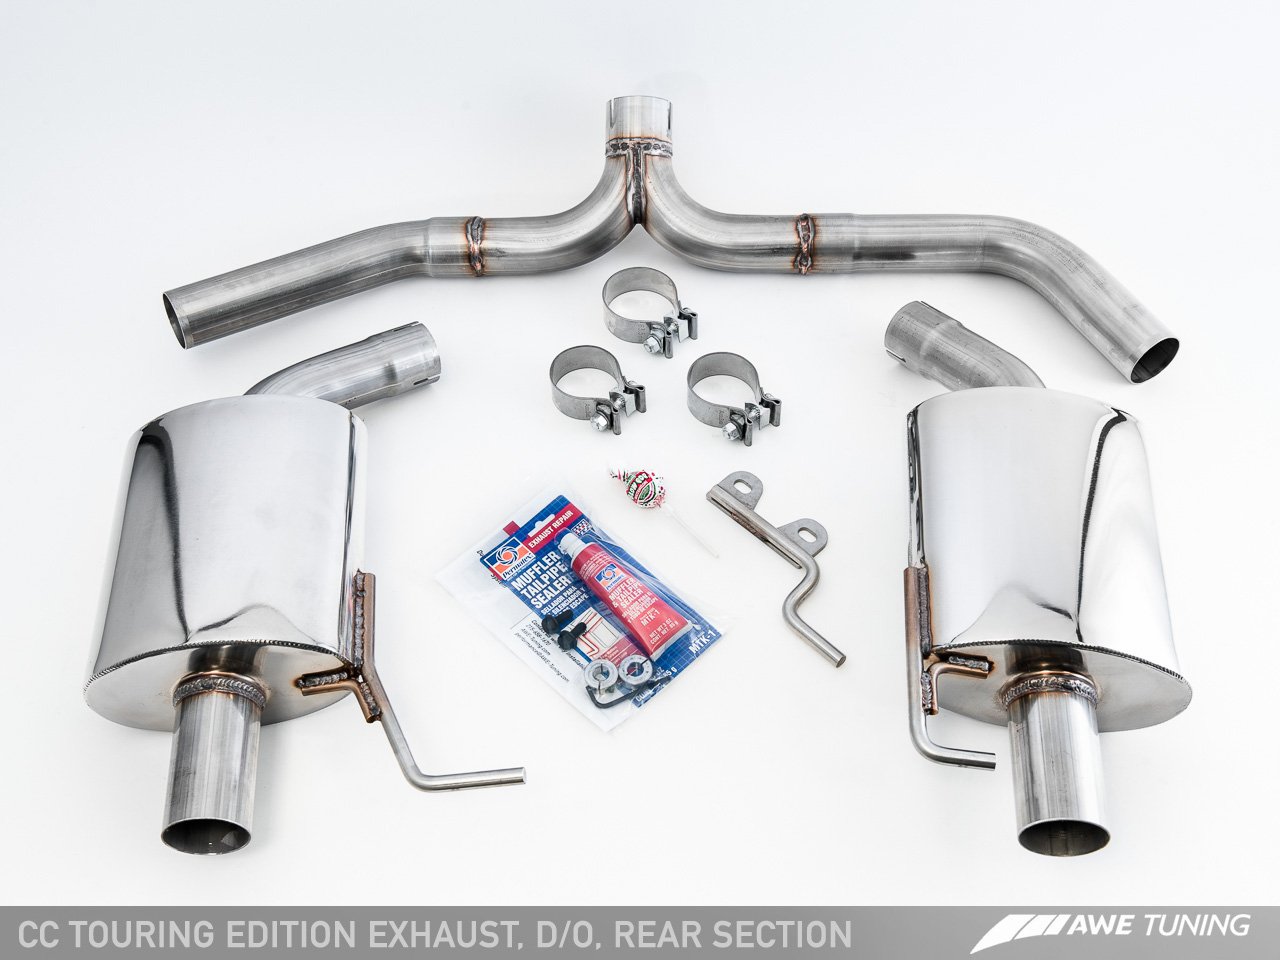 Touring Edition Exhaust for VW CC 2.0T -